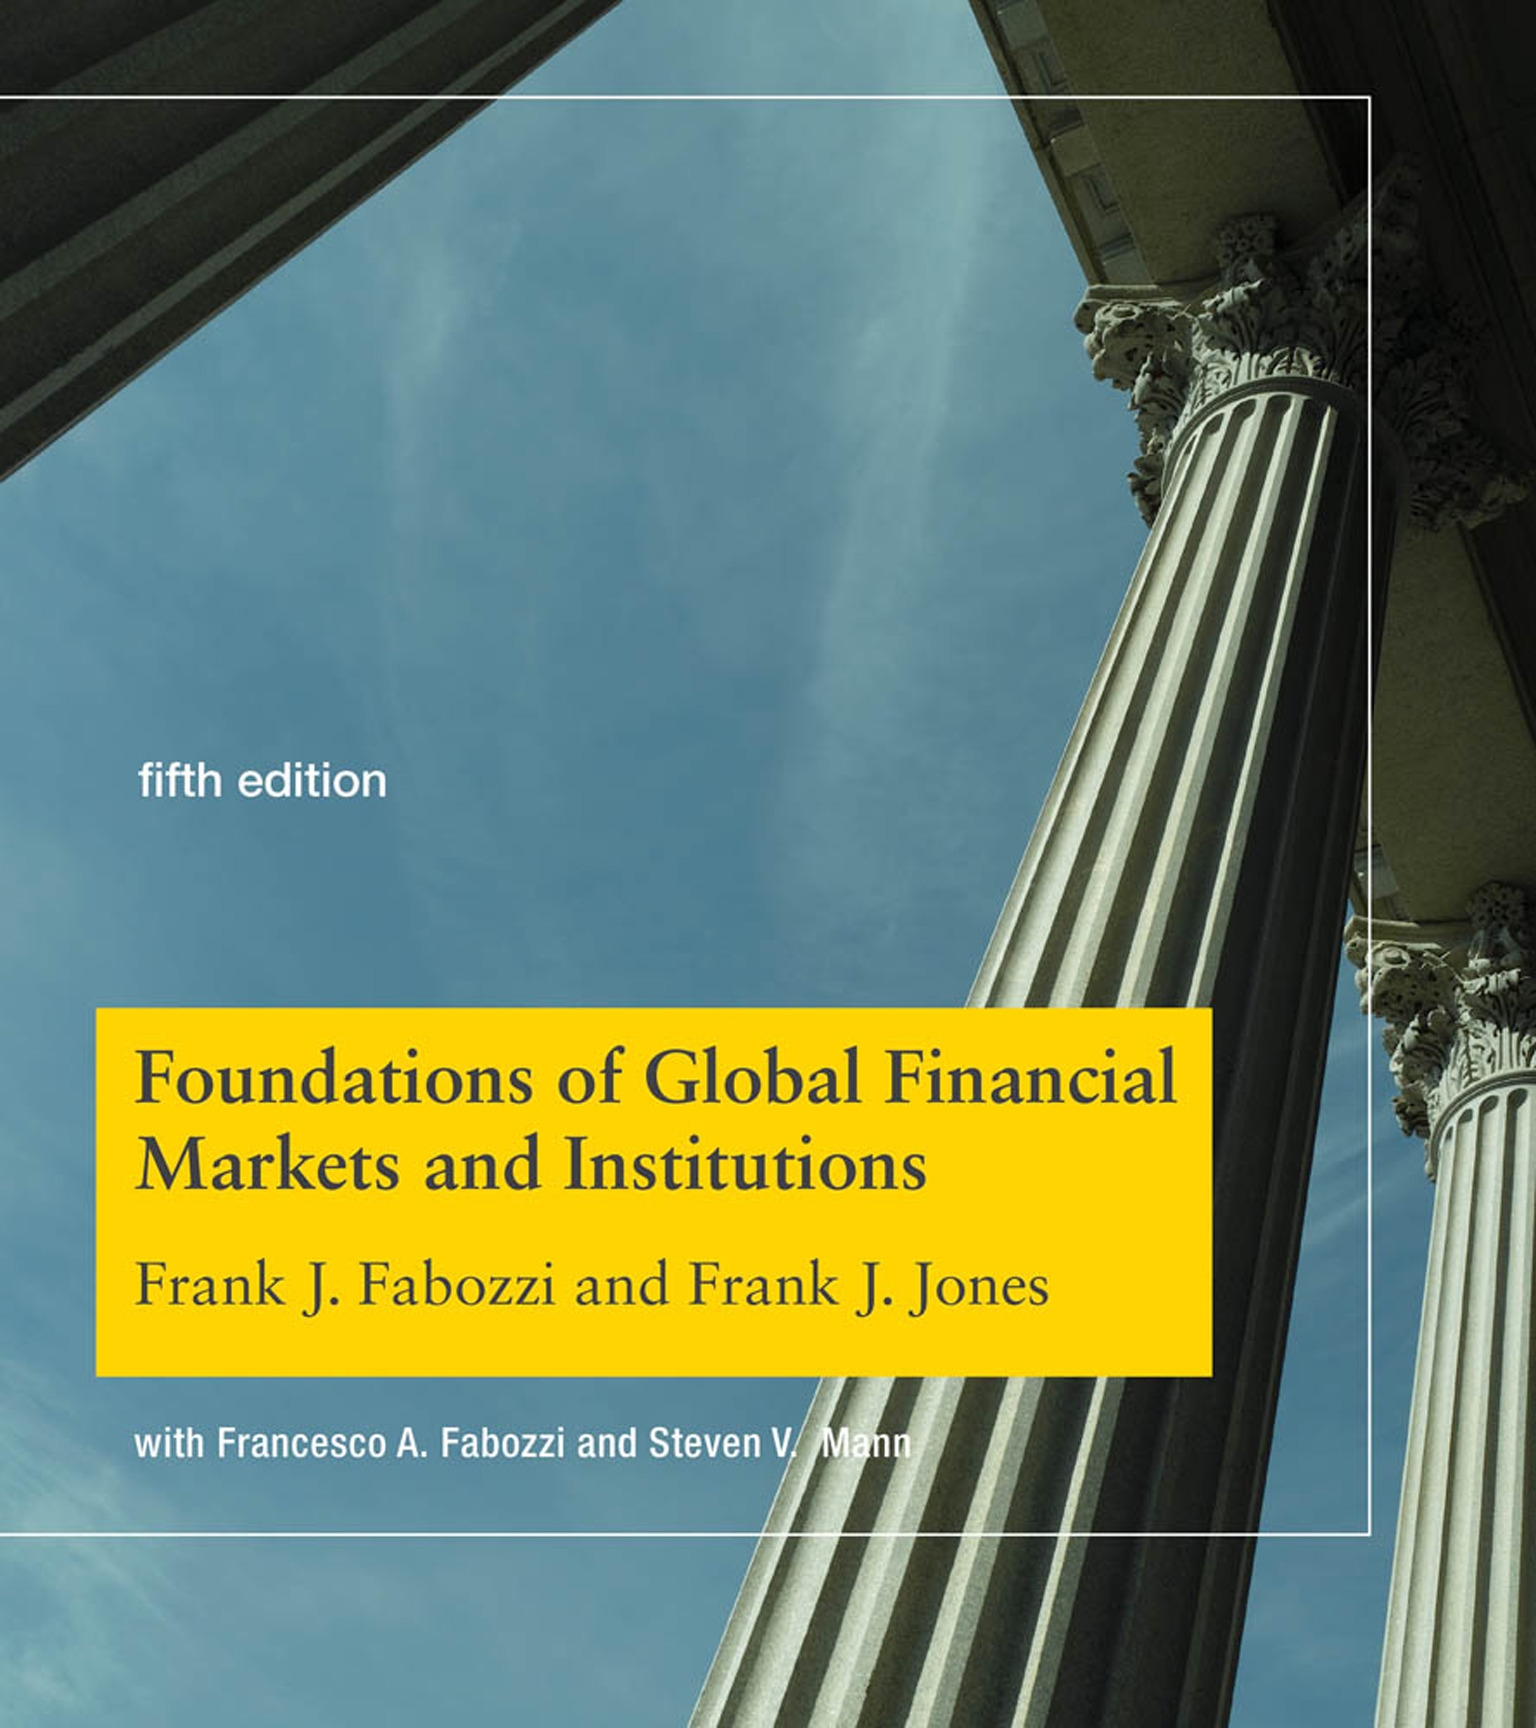 case study on financial institutions and markets